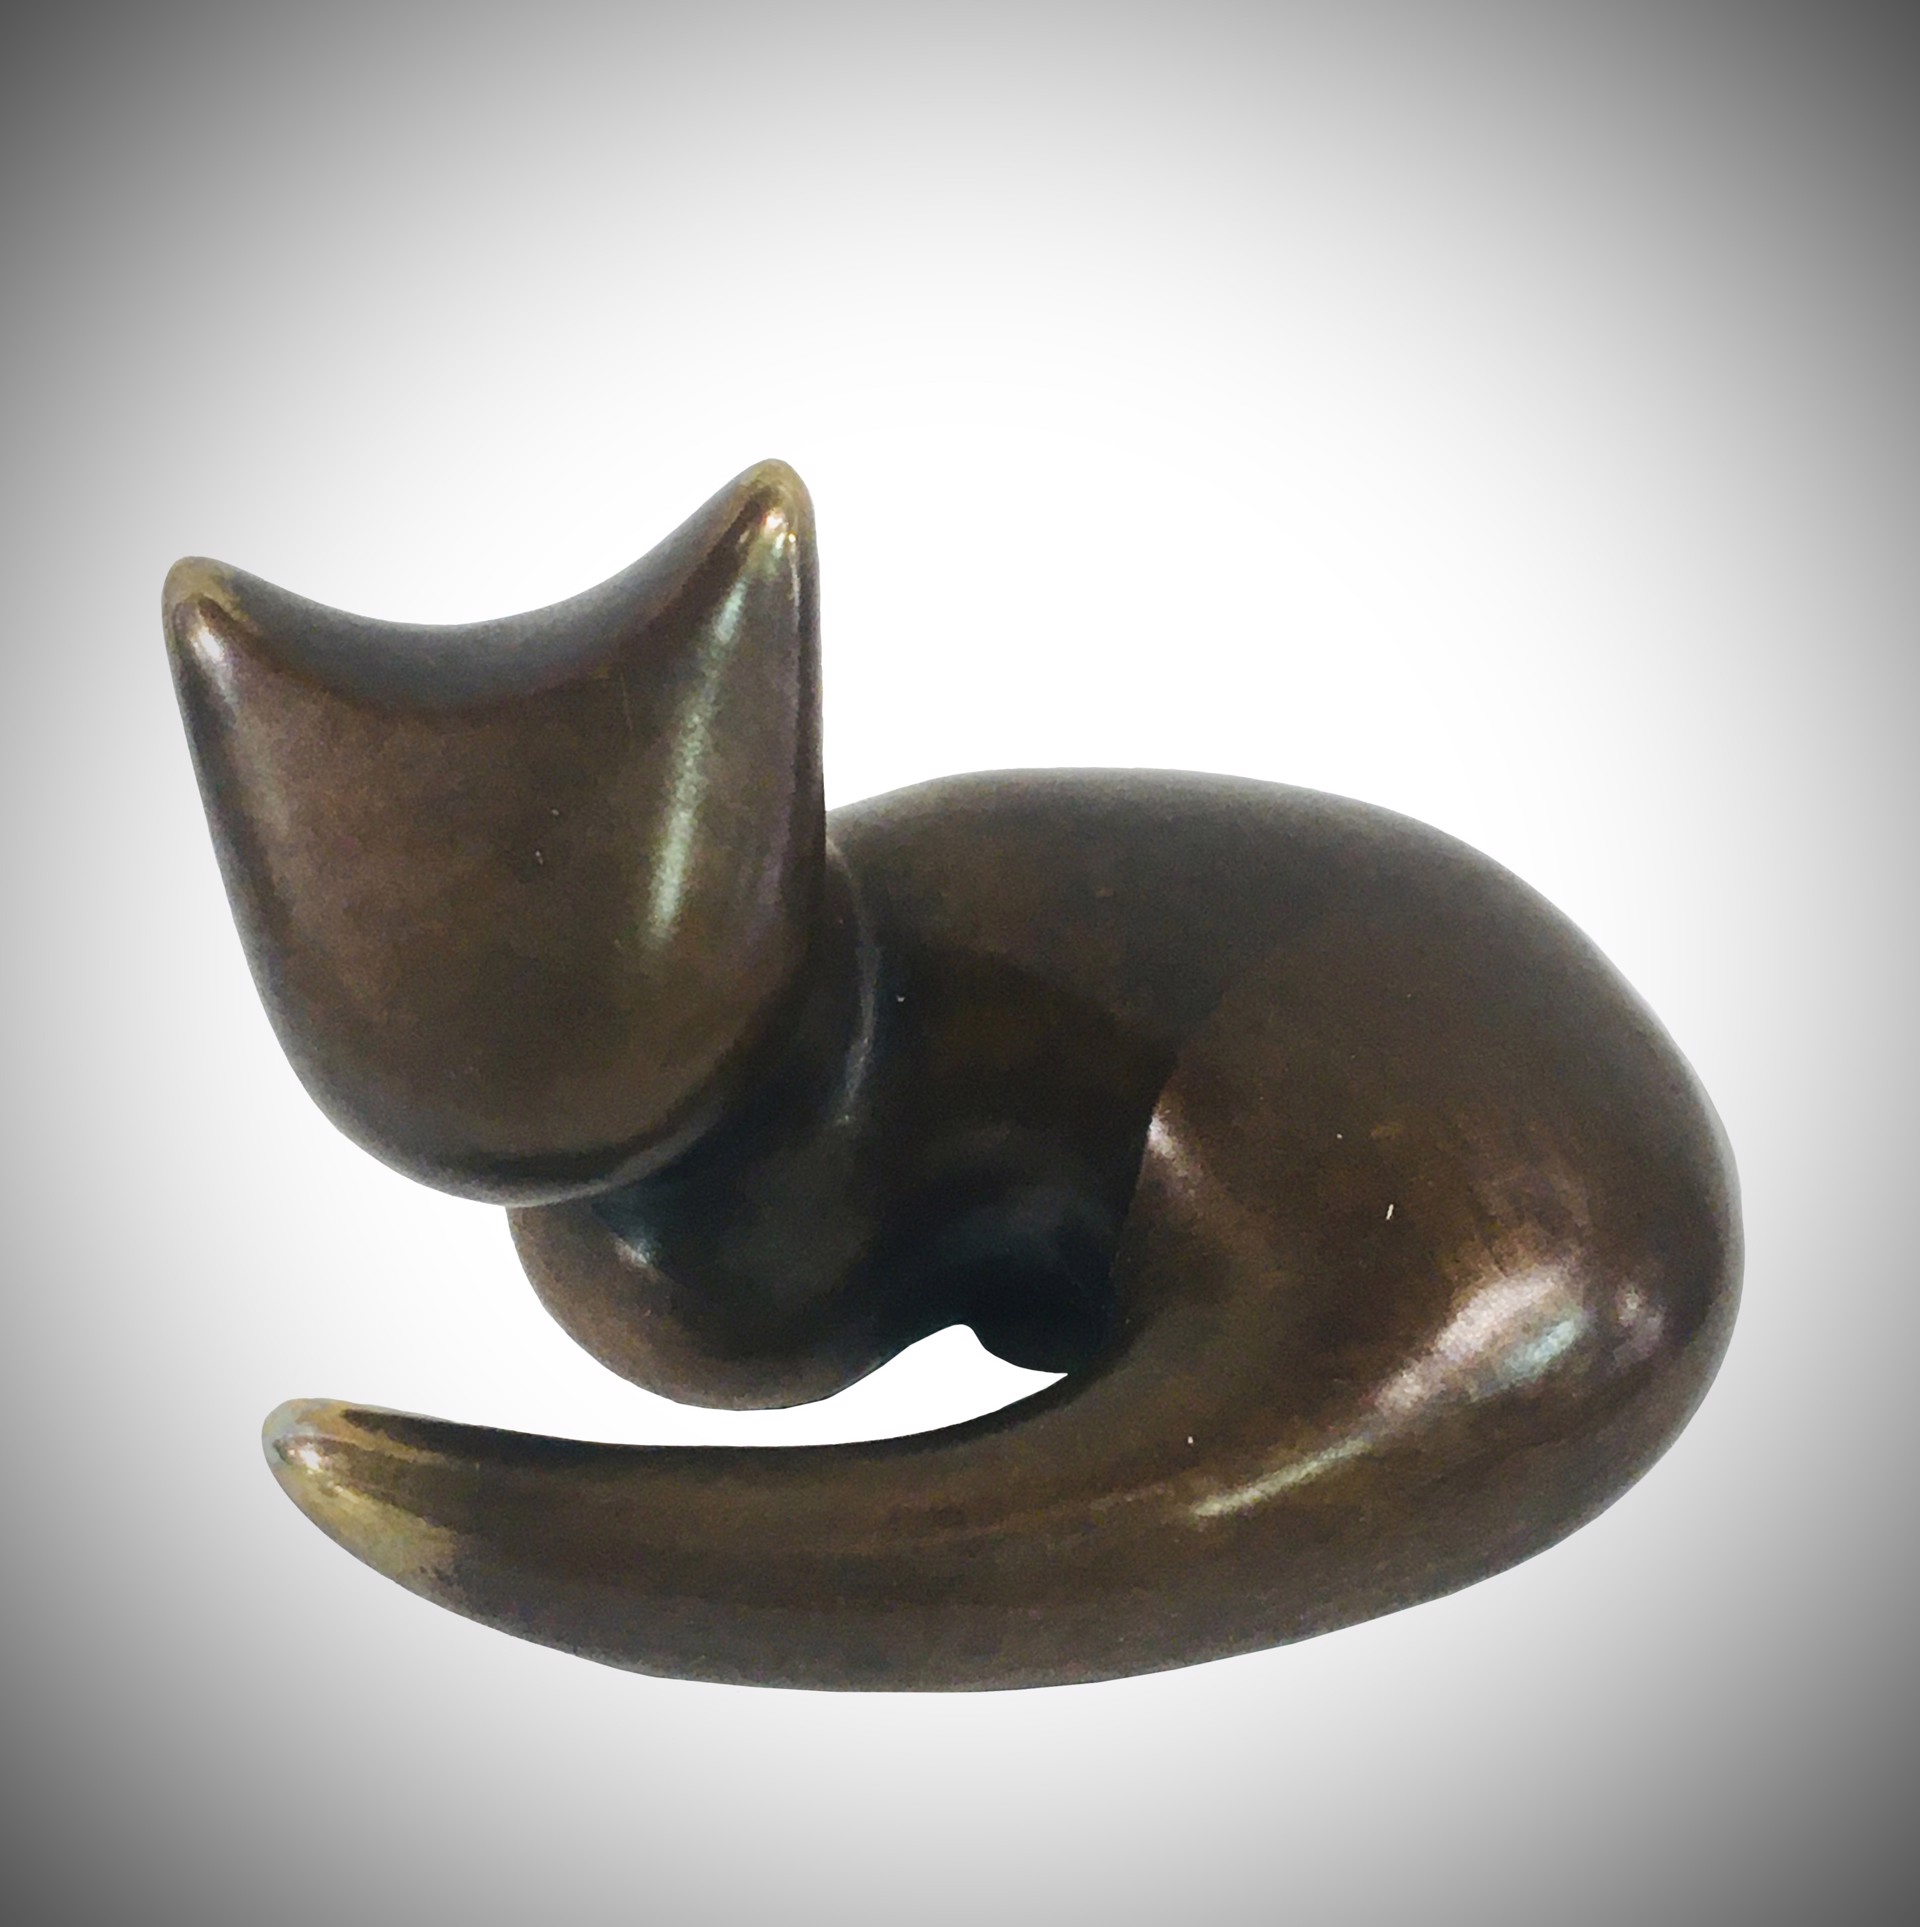 Medium Bronze curled up cat by YENNY COCQ